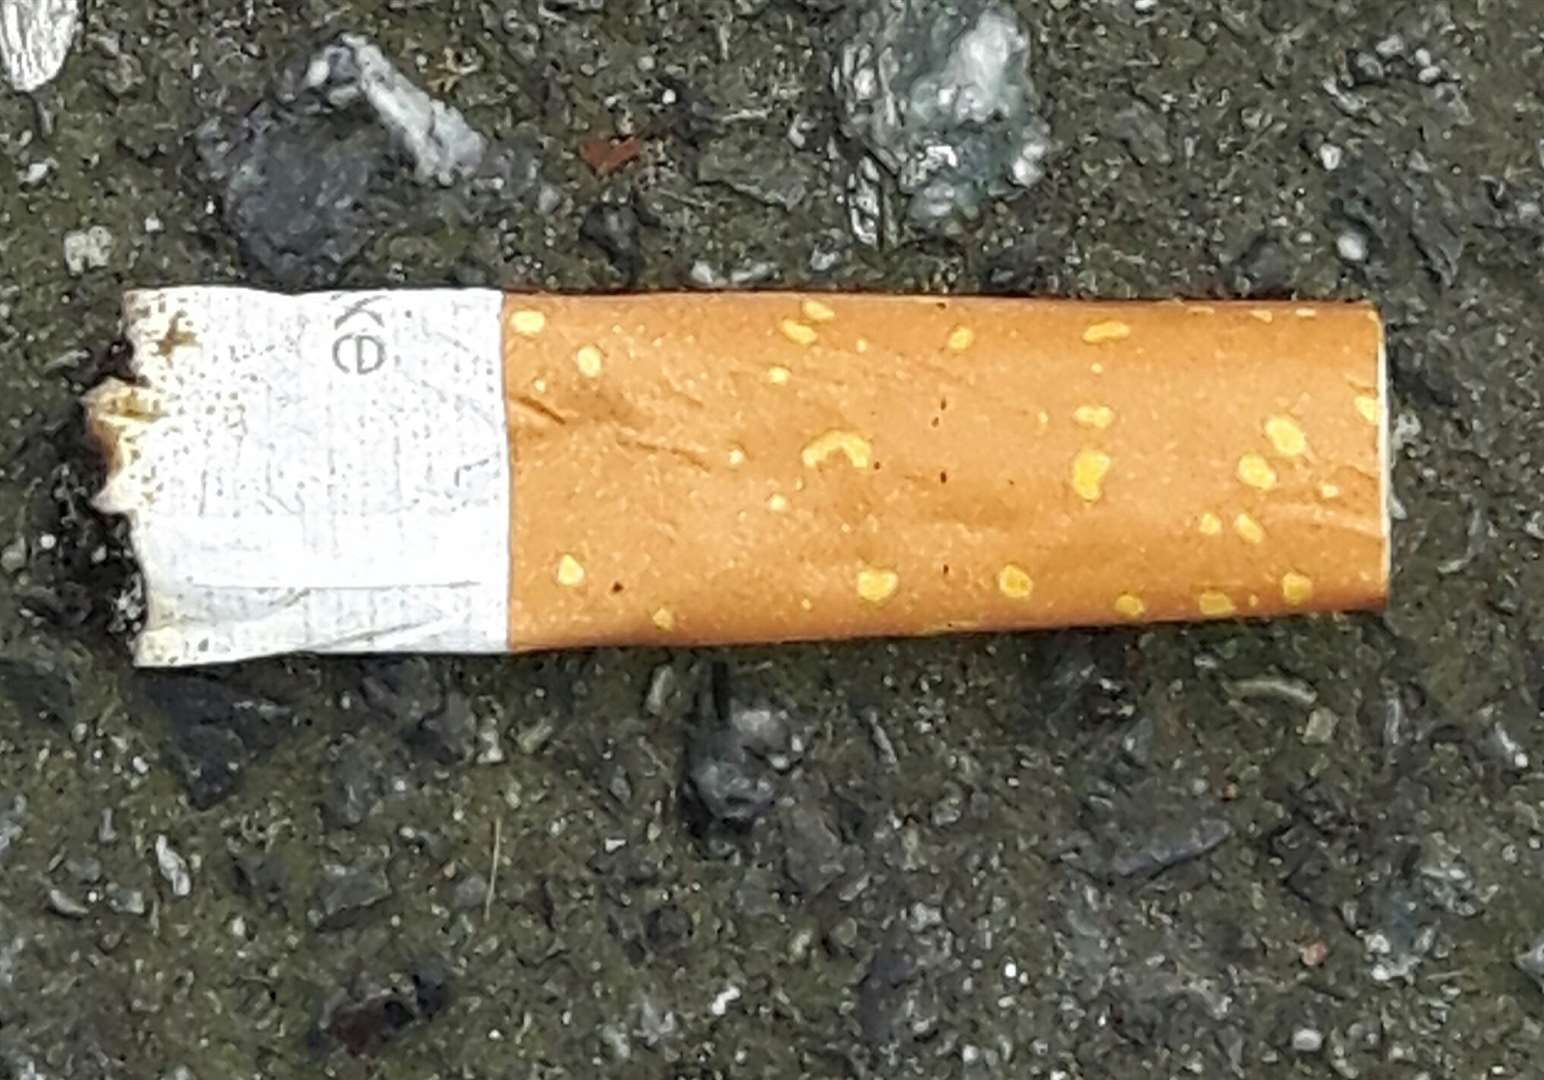 Deposit from a sloppy smoker. Even the smallest amount of litter is unacceptable